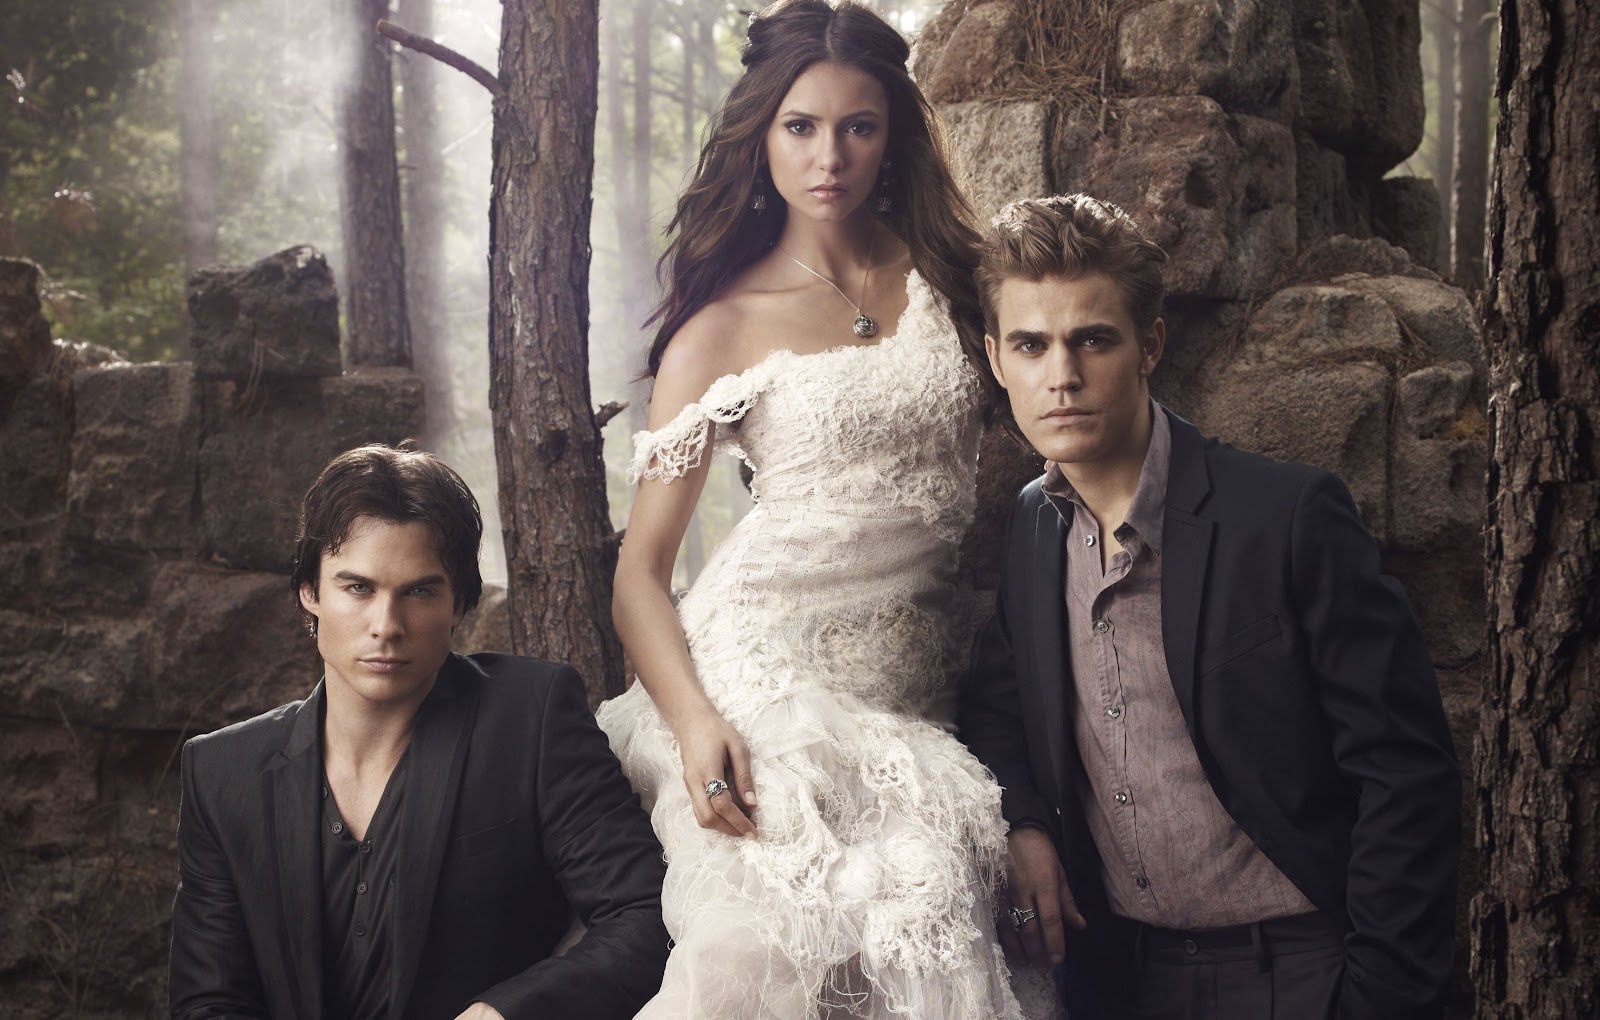 Seriados, Filmes & Afins: The Vampire Diaries / 3x 18 / The Murder Of One